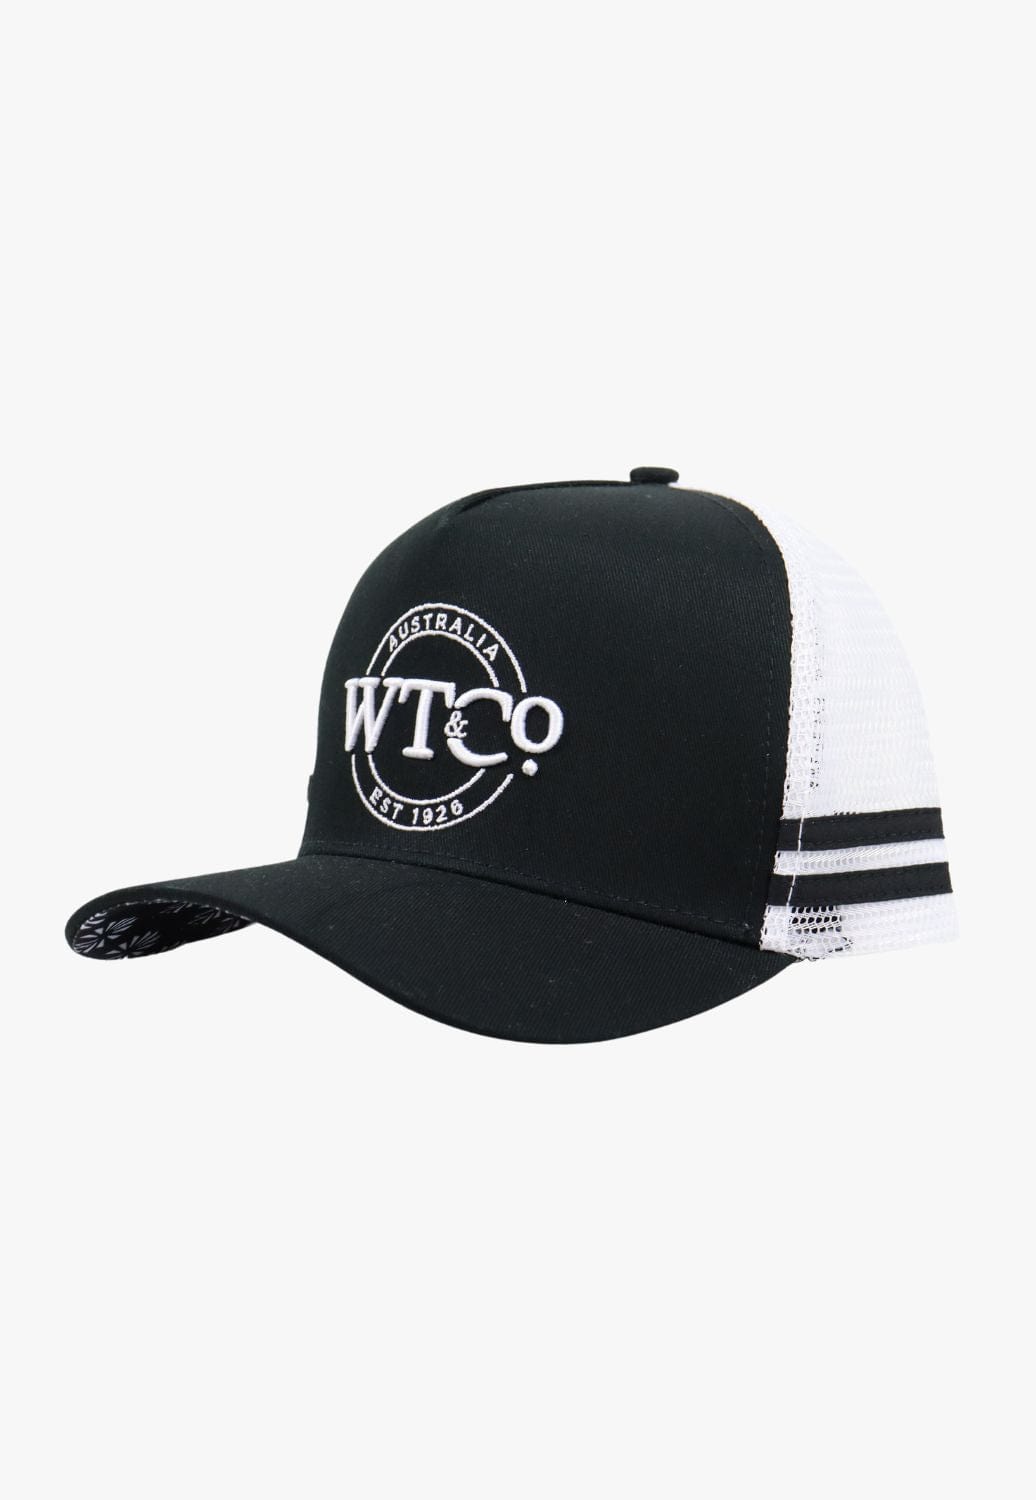 W. Titley and Co HATS - Caps Black/White W. Titley & Co Trucker Cap